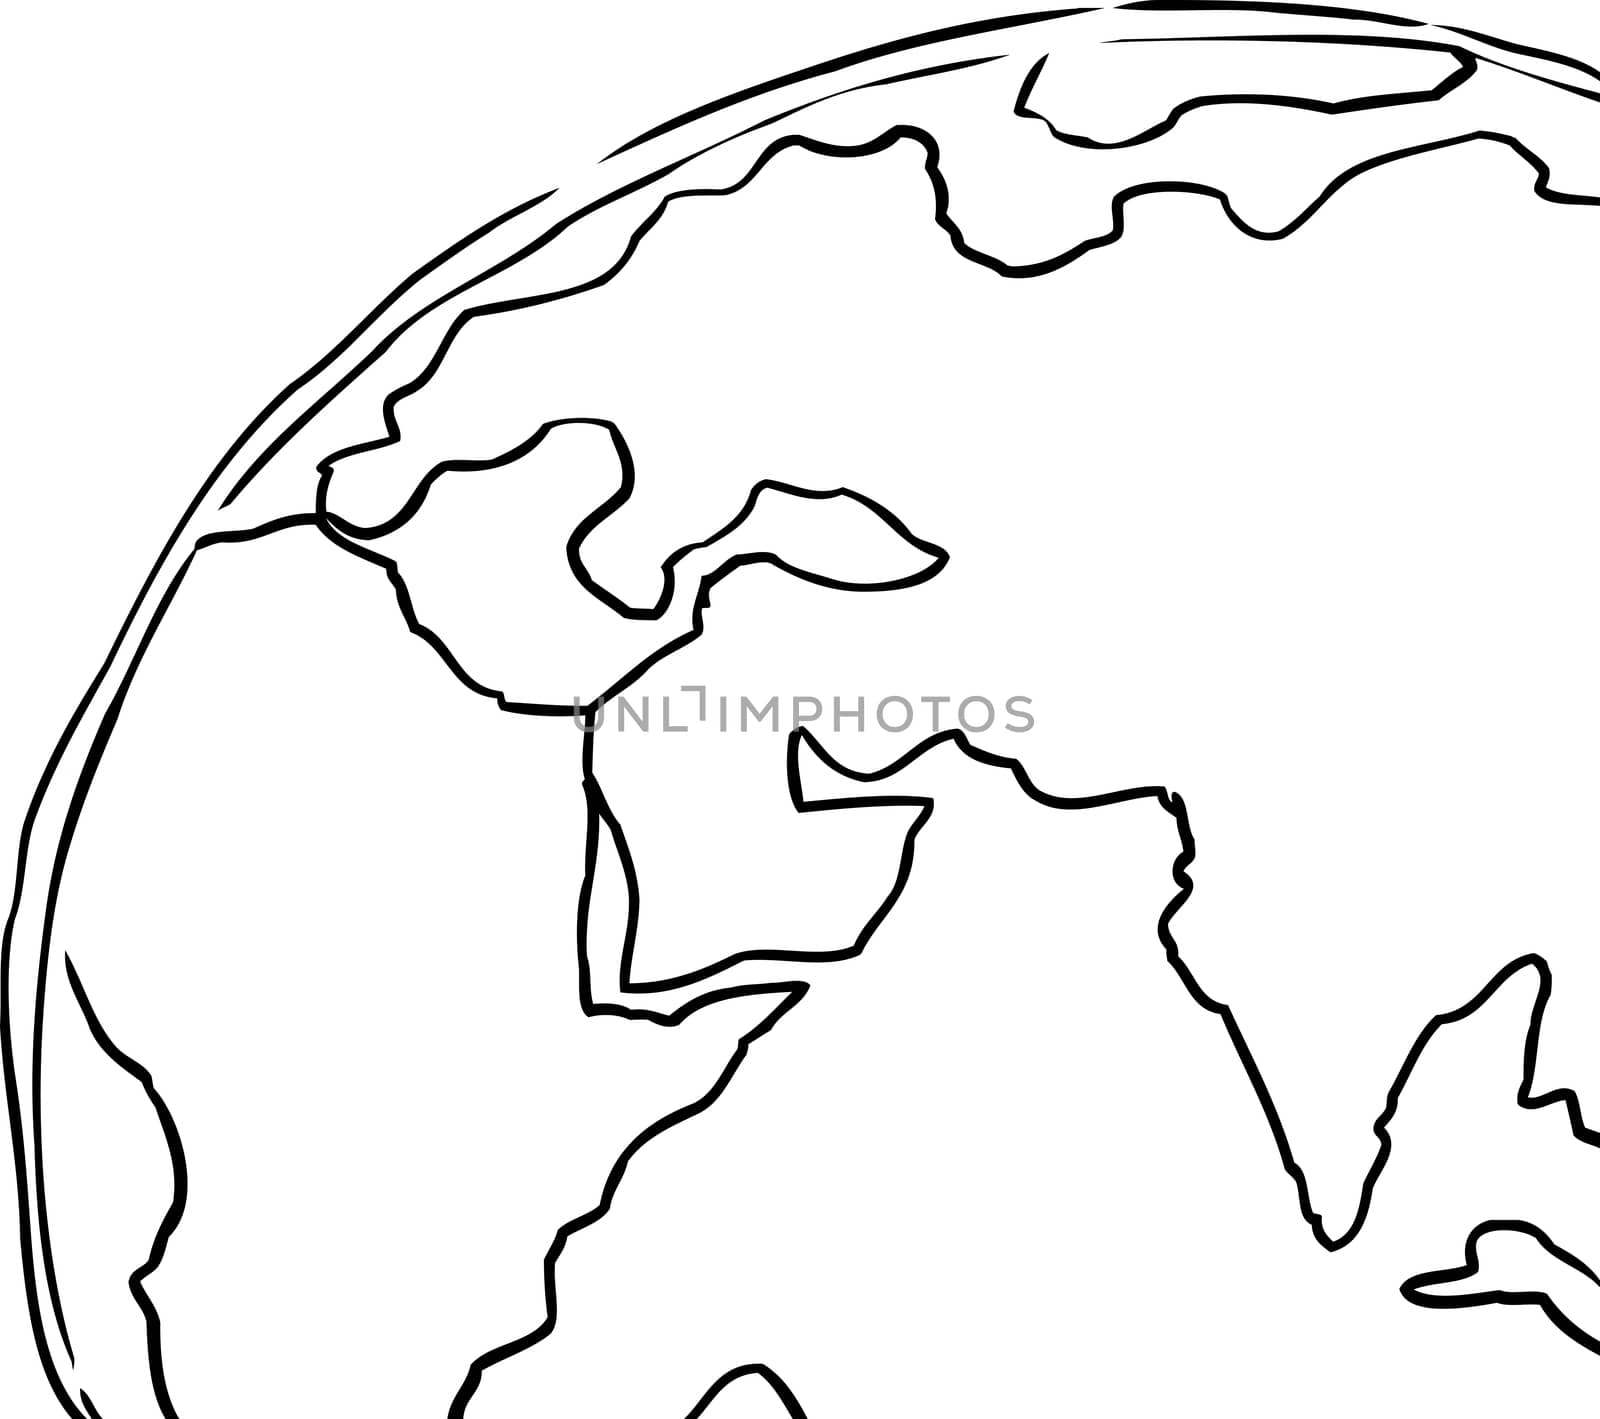 Cropped View of Earth Outline by TheBlackRhino